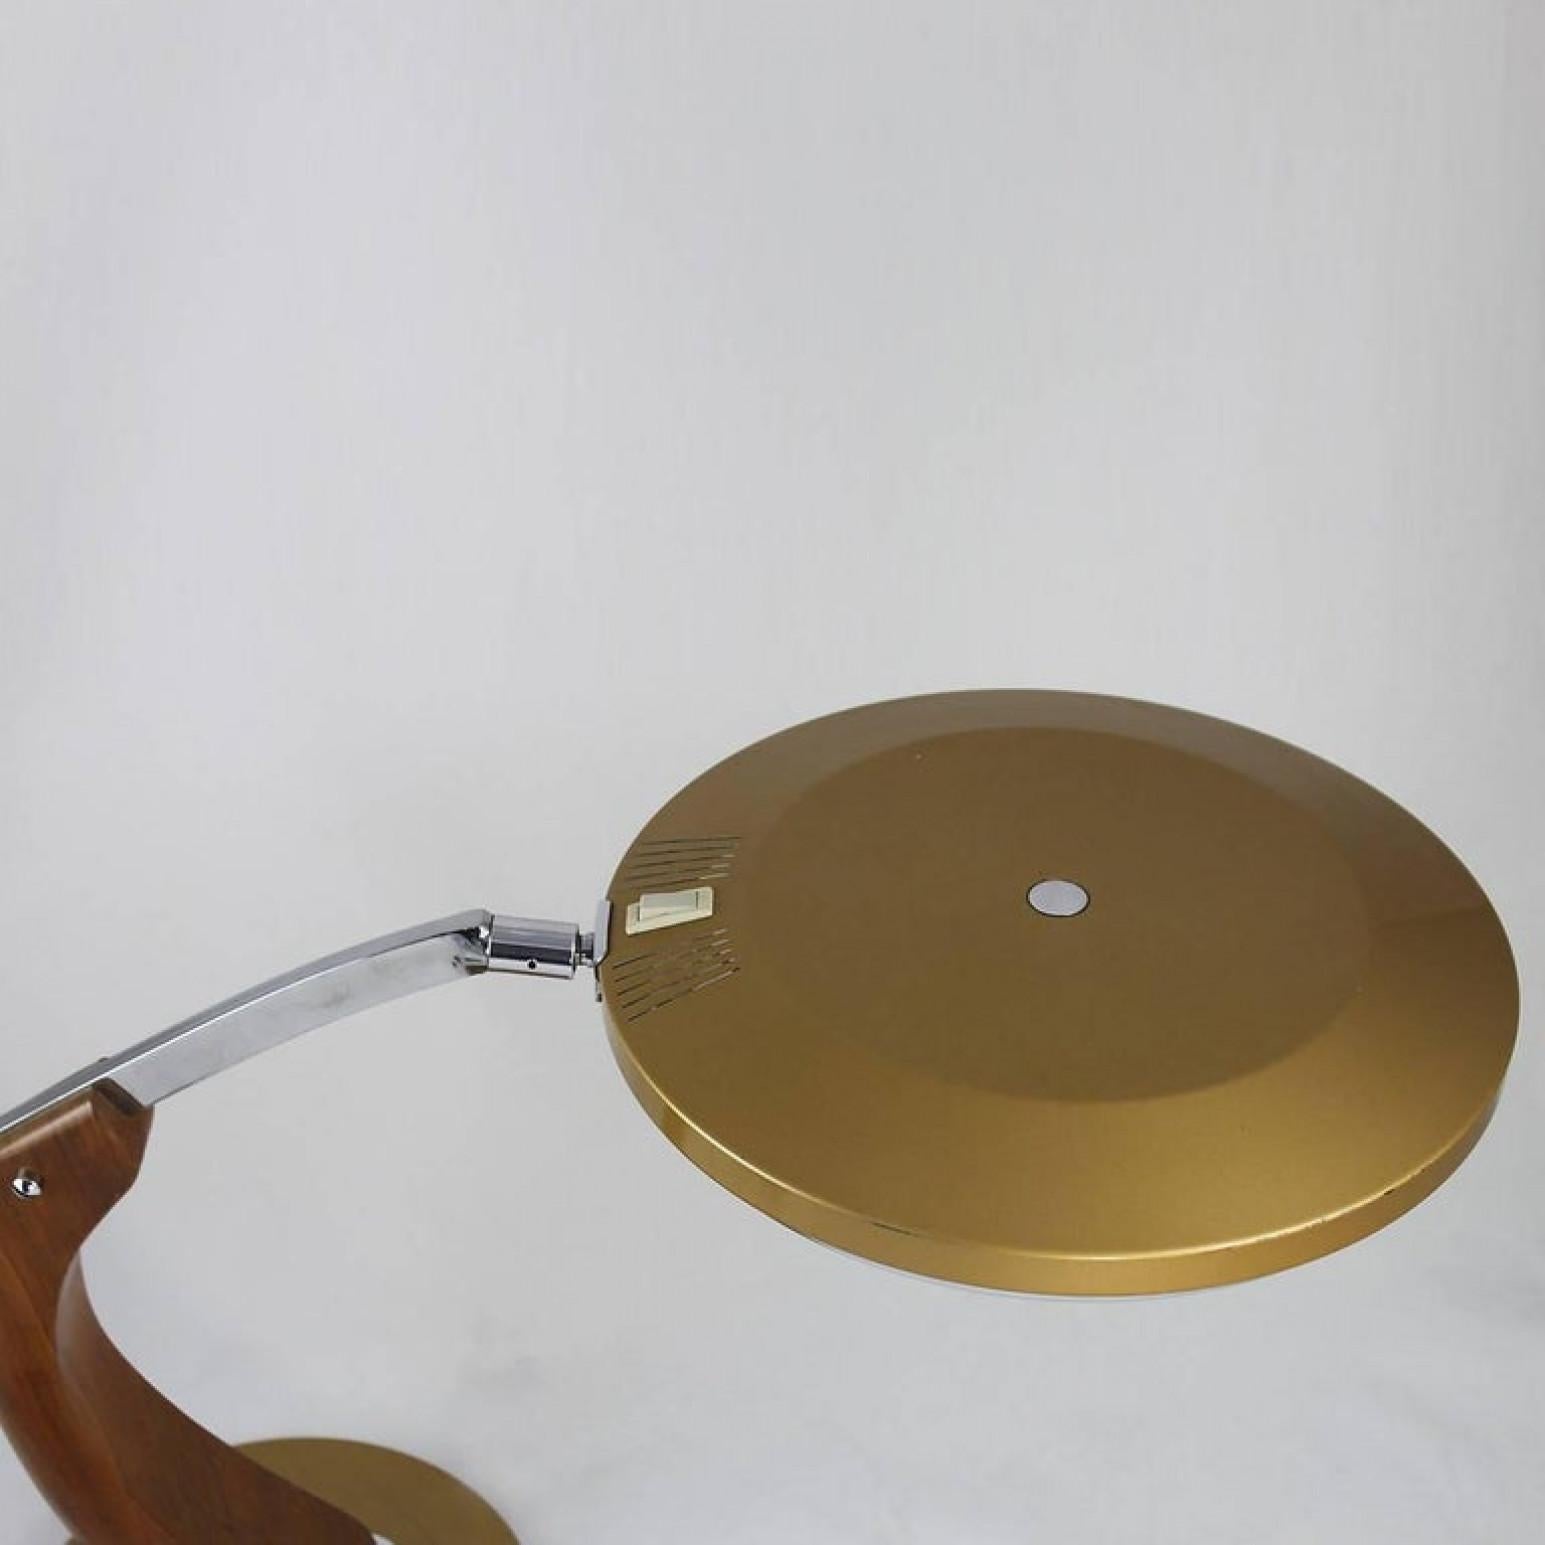 A beautiful midcentury Spanish desk lamp from Fase Madrid from the 1960s. The Spanish lighting manufacturer Fase was established in Madrid in 1964 by Industrial designer Pedro Martín.

Lamp manufactured by fase with fot in oak part in brass and